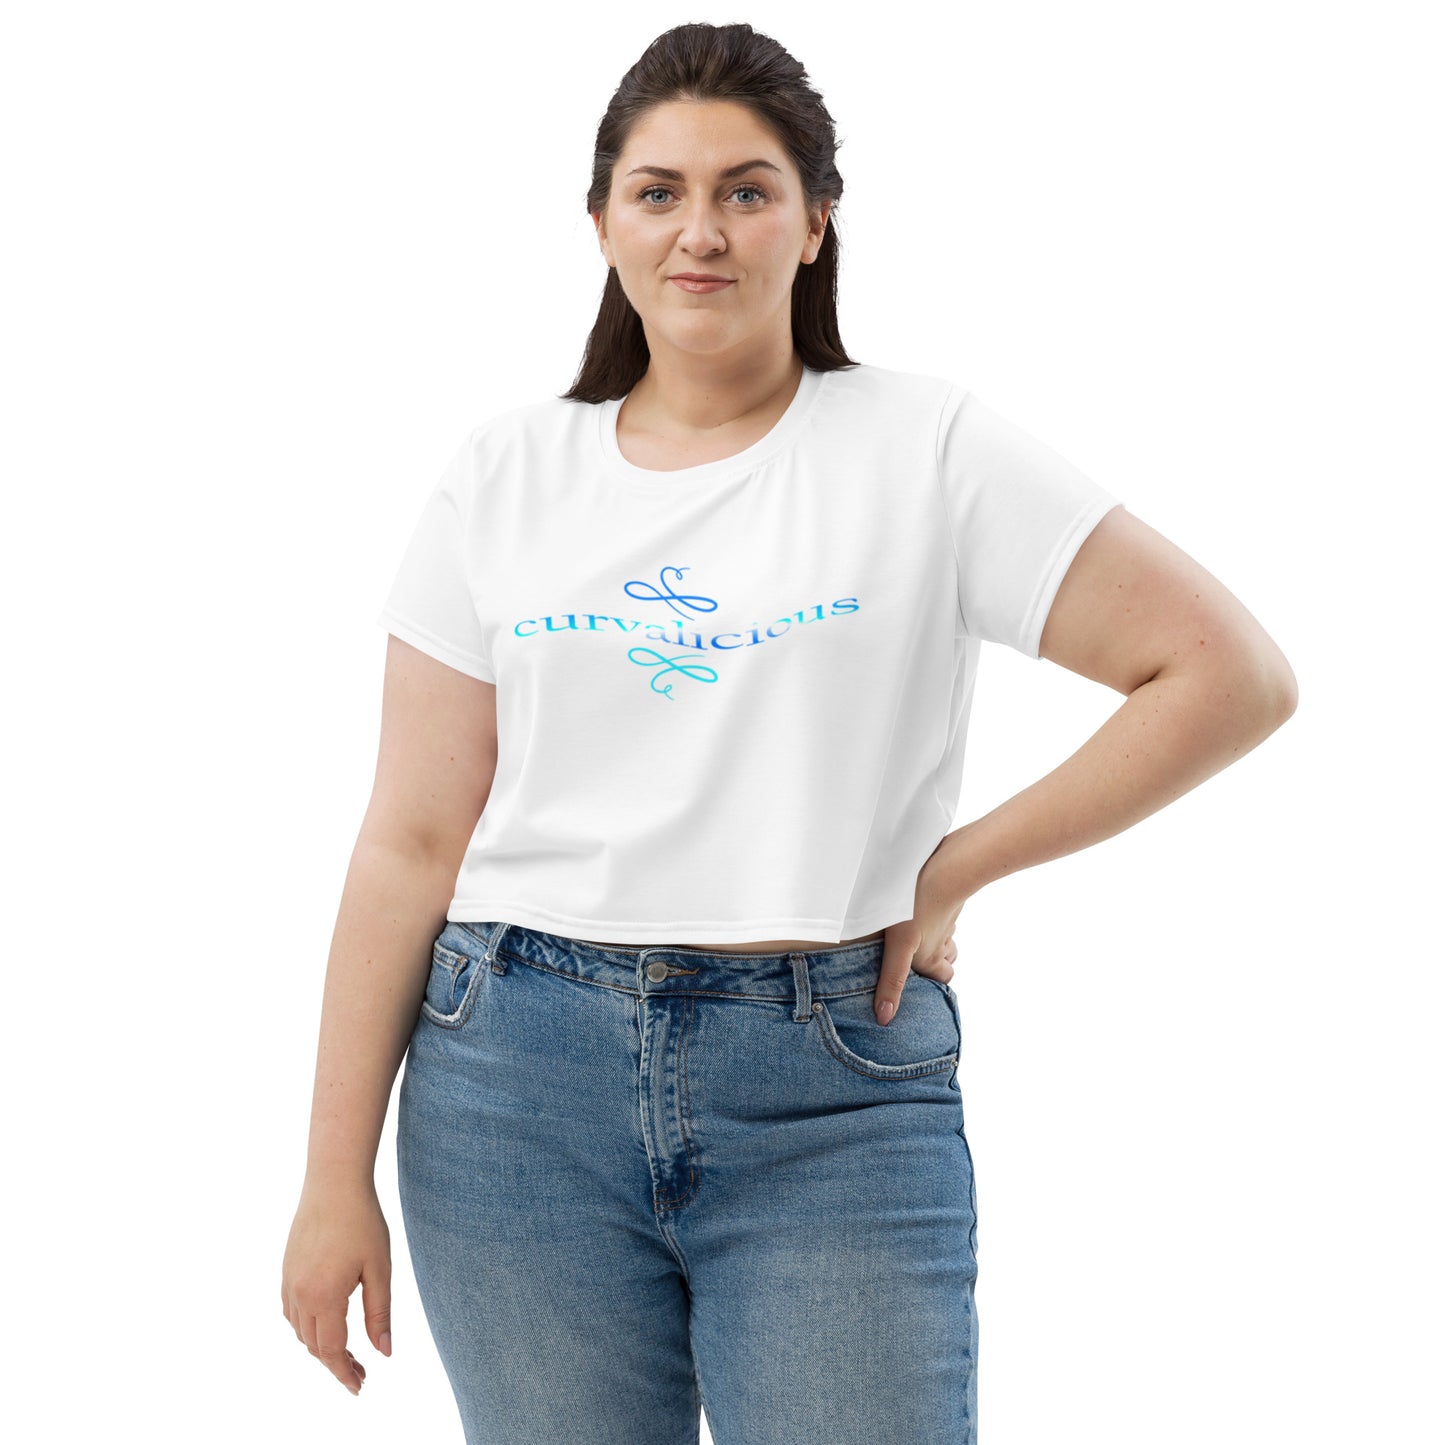 Crop Tee: Curvalicious (text in shades of blue)